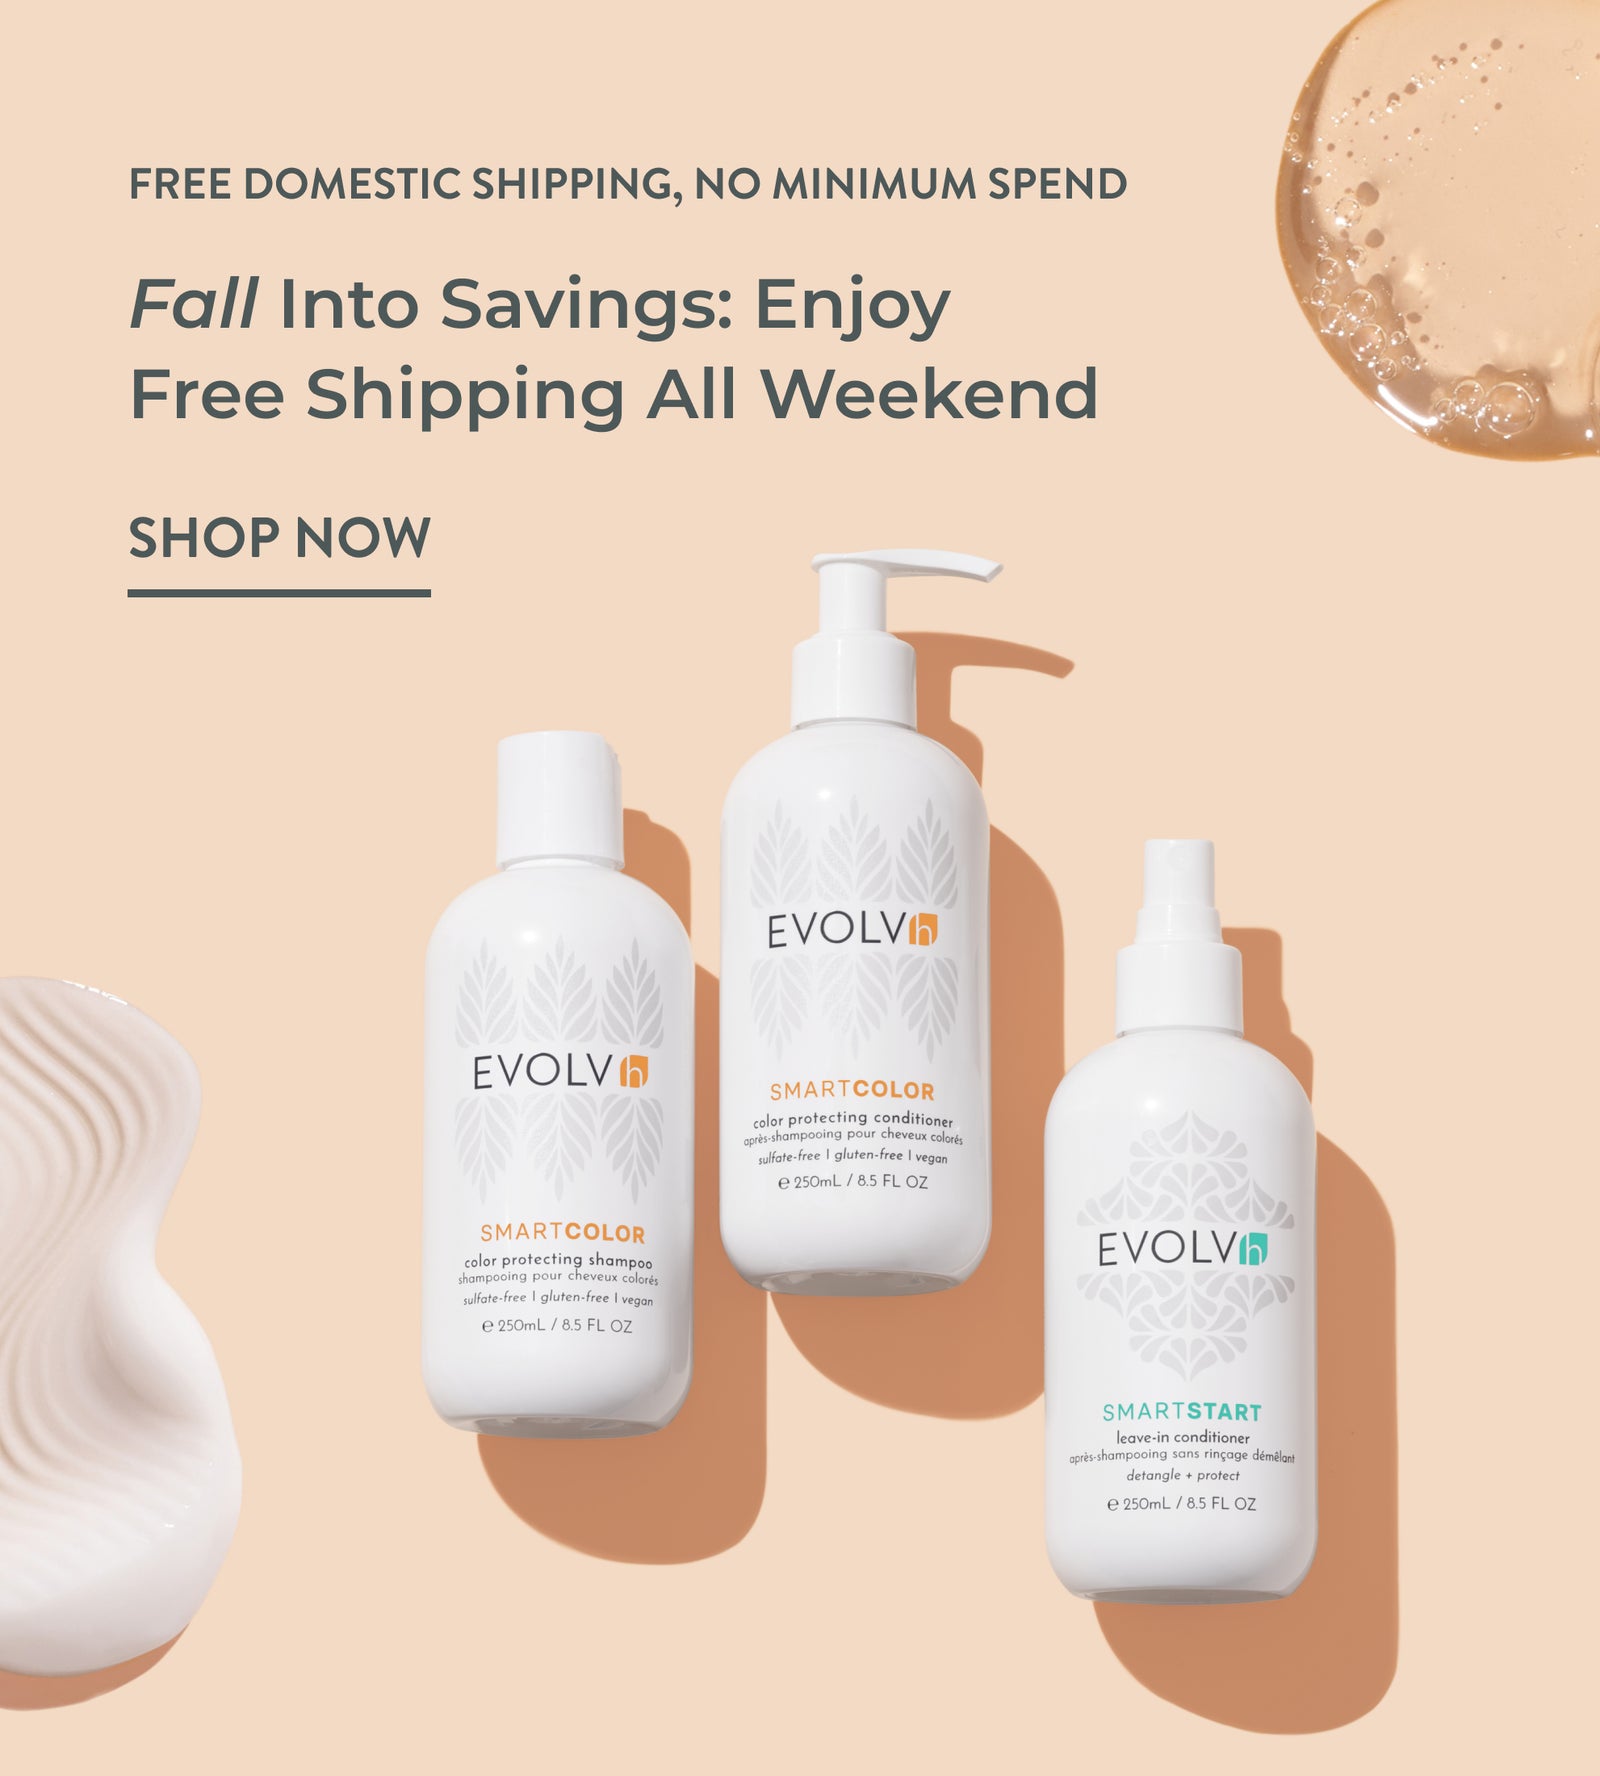 Clean hair products from EVOLVh – shop now